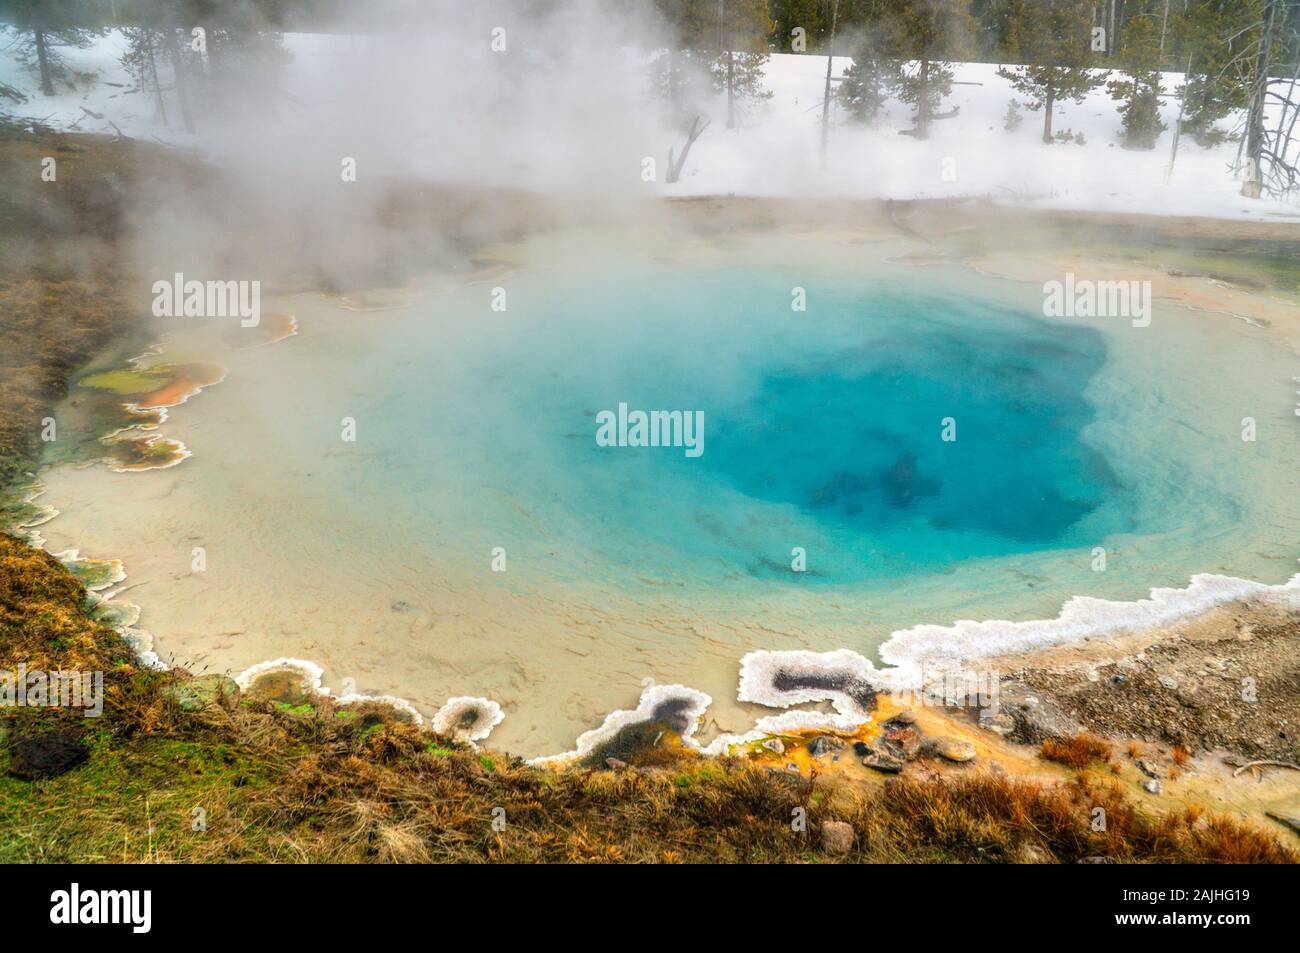 View of the Norris Geyser Basin with a Geothermal blue pool, Yellowstone National Park, USA. Stock Photo